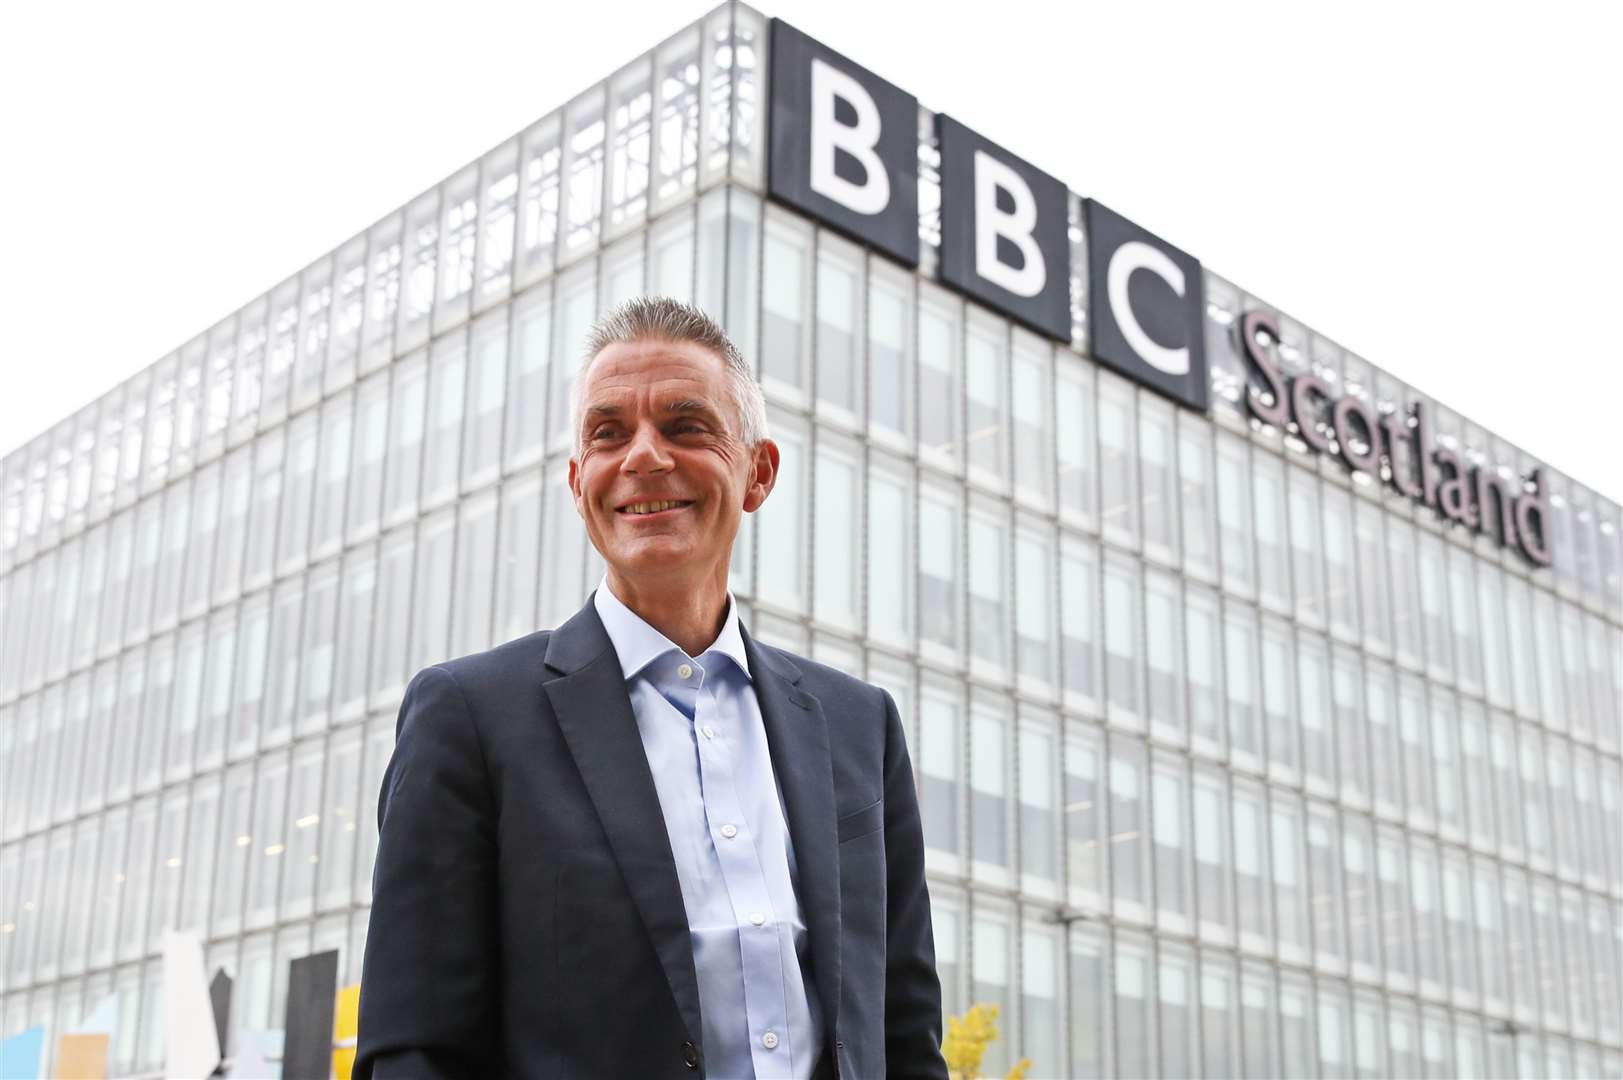 Tim Davie is the new director general of the BBC (Andrew Milligan/PA)